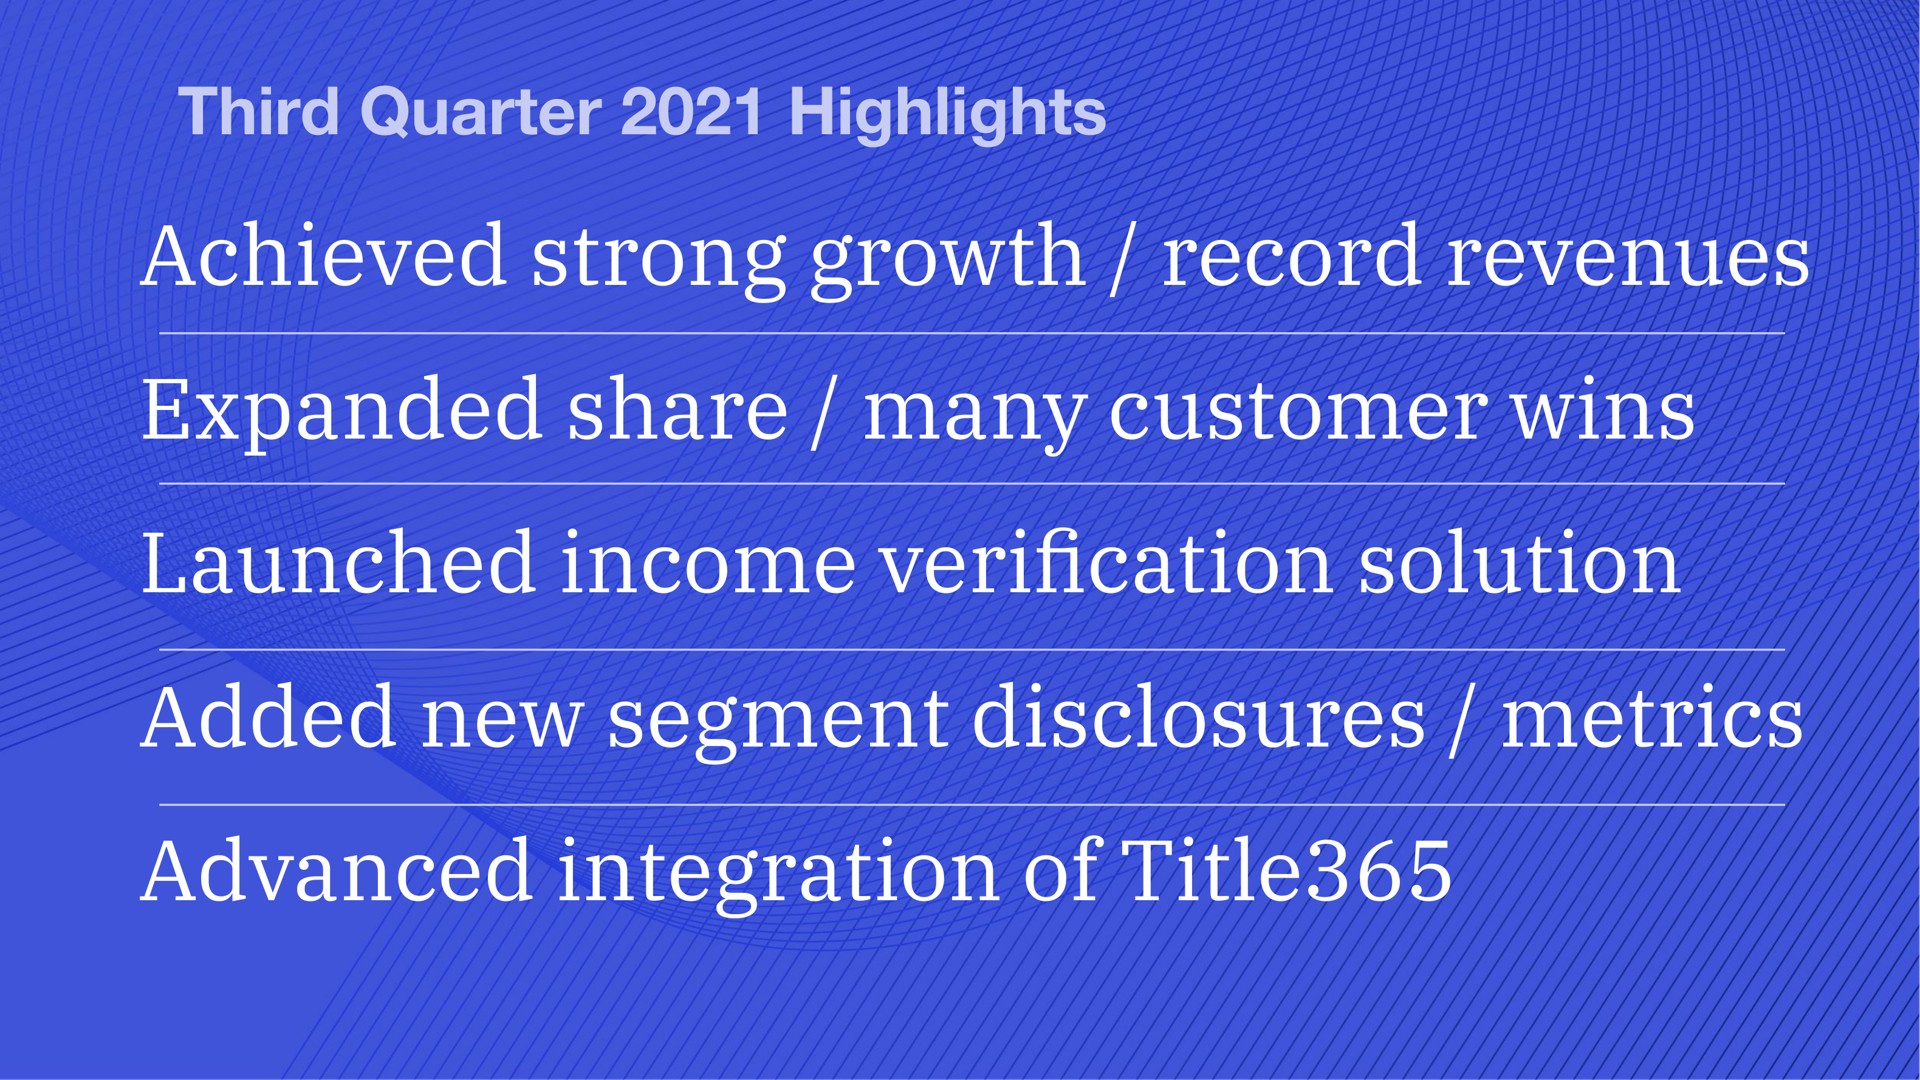 third quarter highlights achieved strong growth record revenues expanded share many customer wins launched income veri cation solution added new segment disclosures metrics advanced integration of title verification | Blend